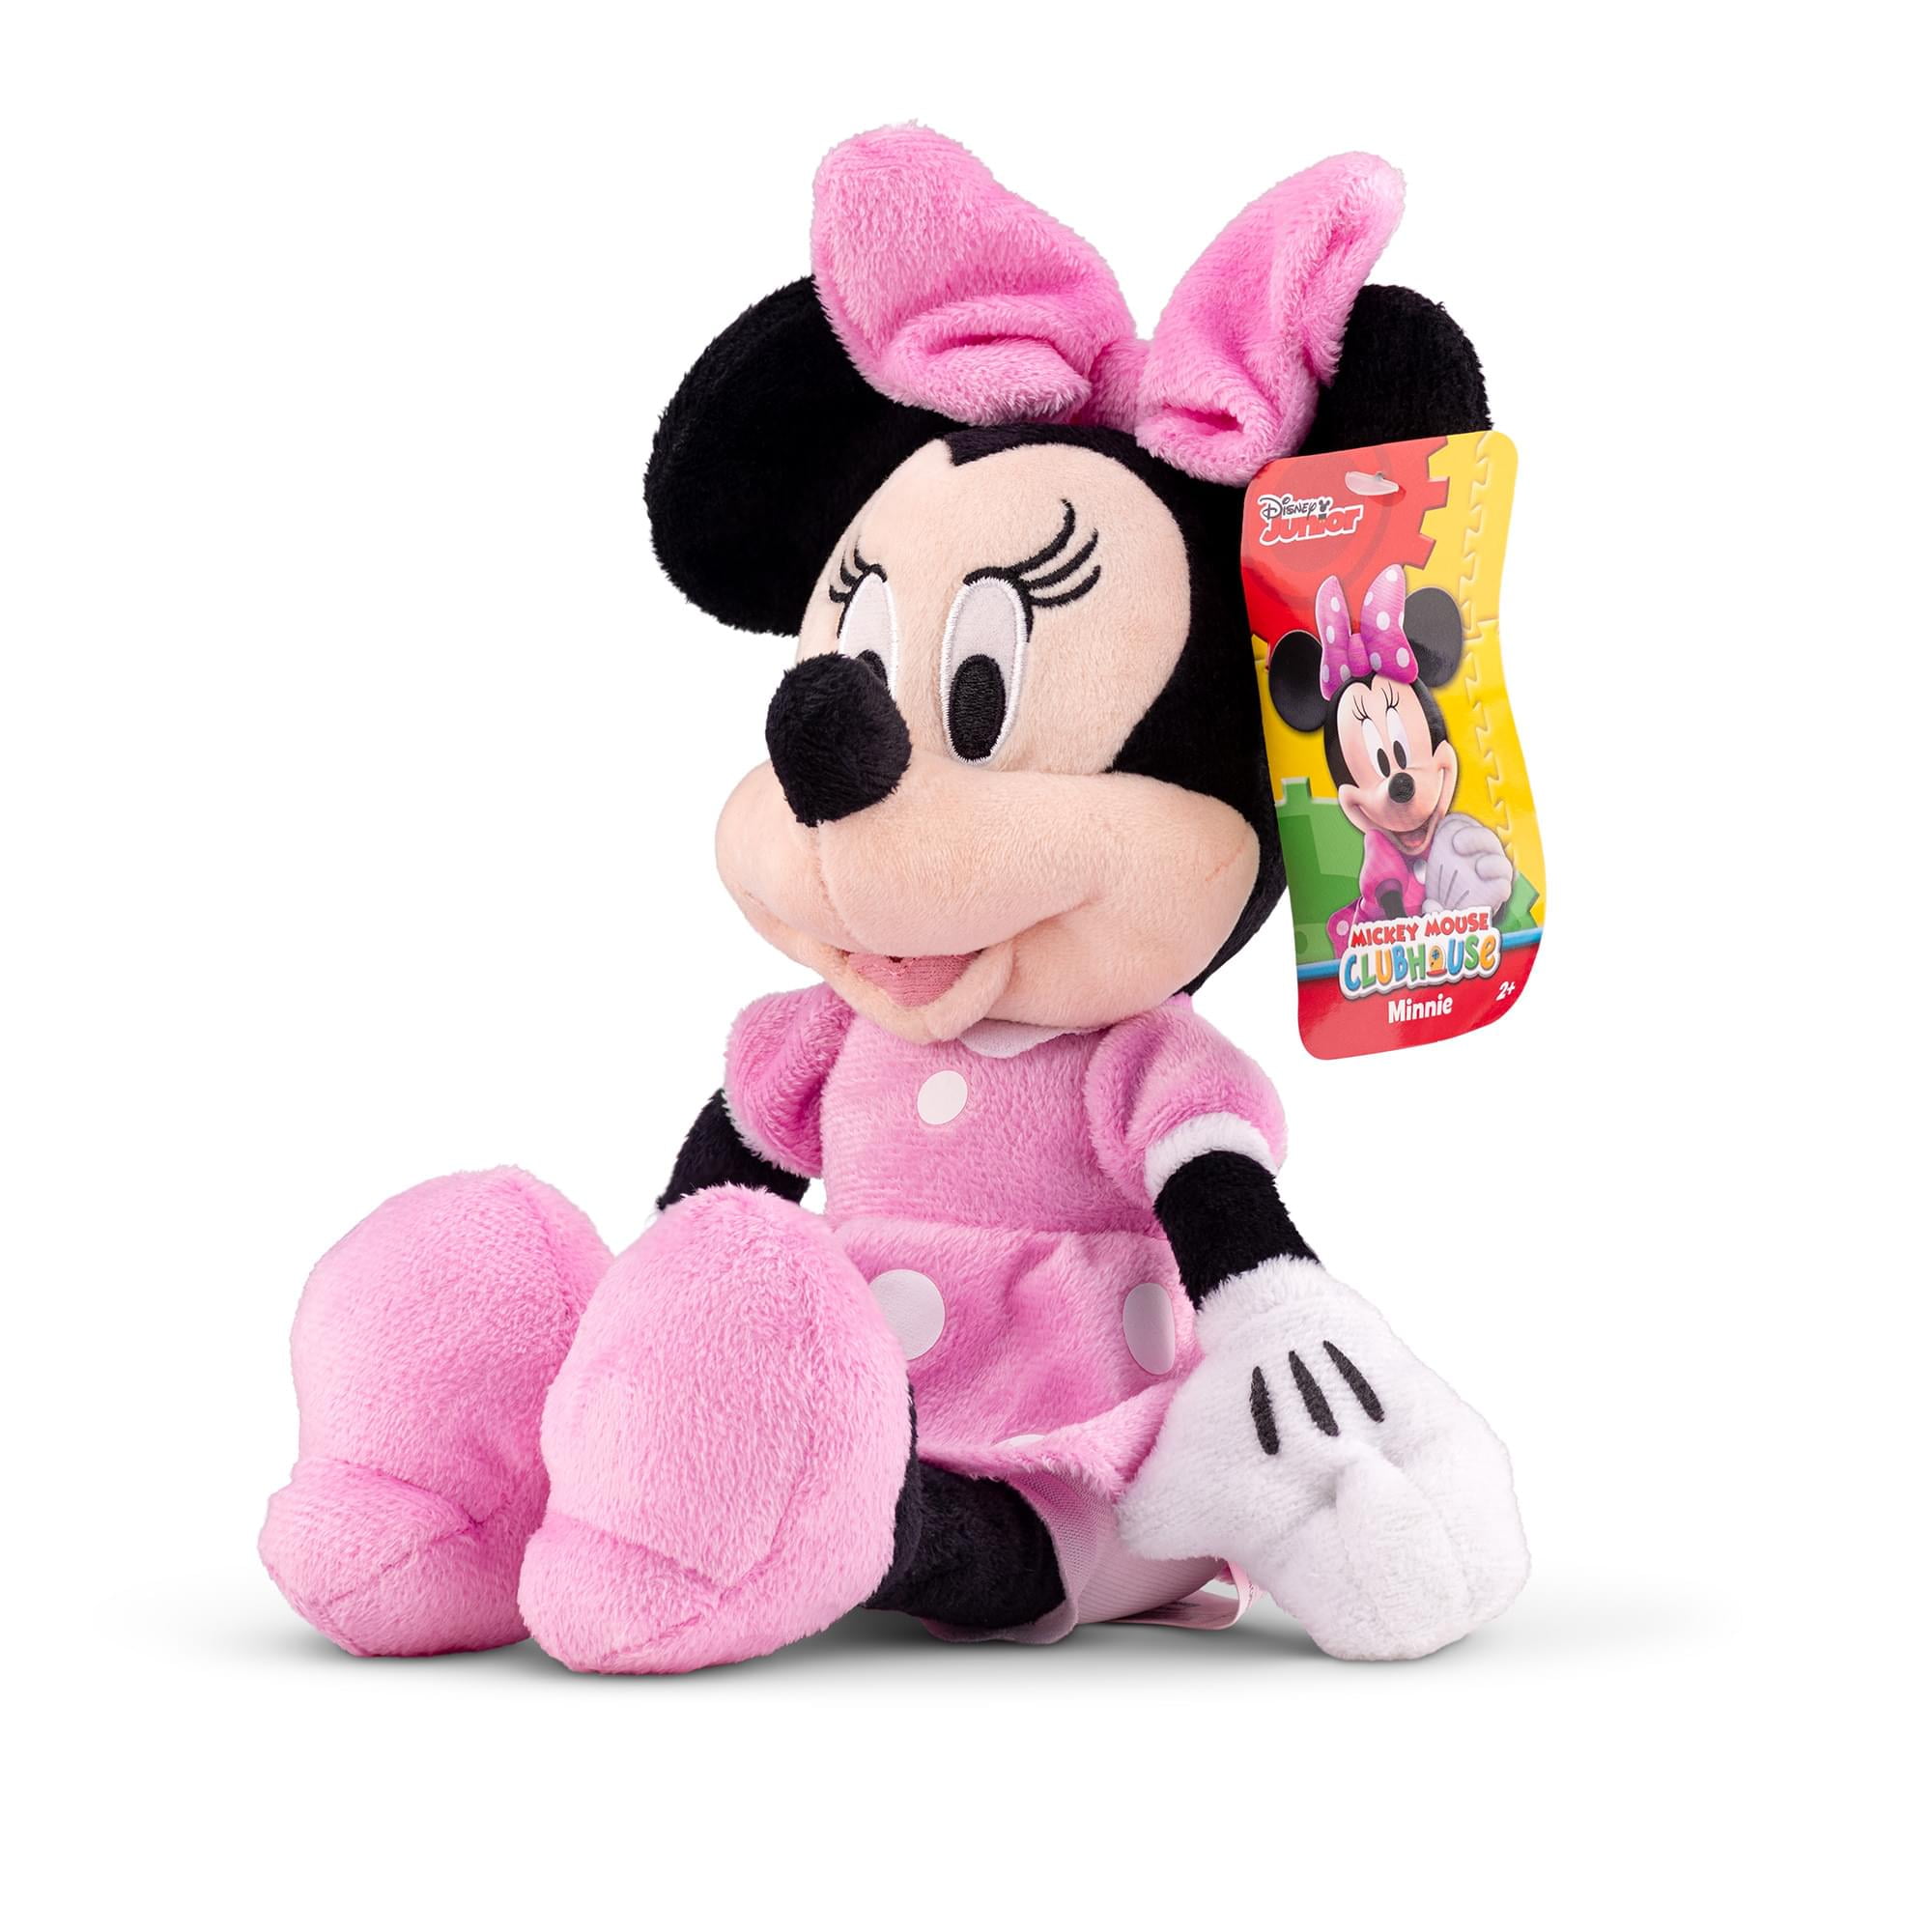 Minnie Mouse Bike Pink Girls Disney Teddy Carrier Toy Kids Christmas Gift New UK 